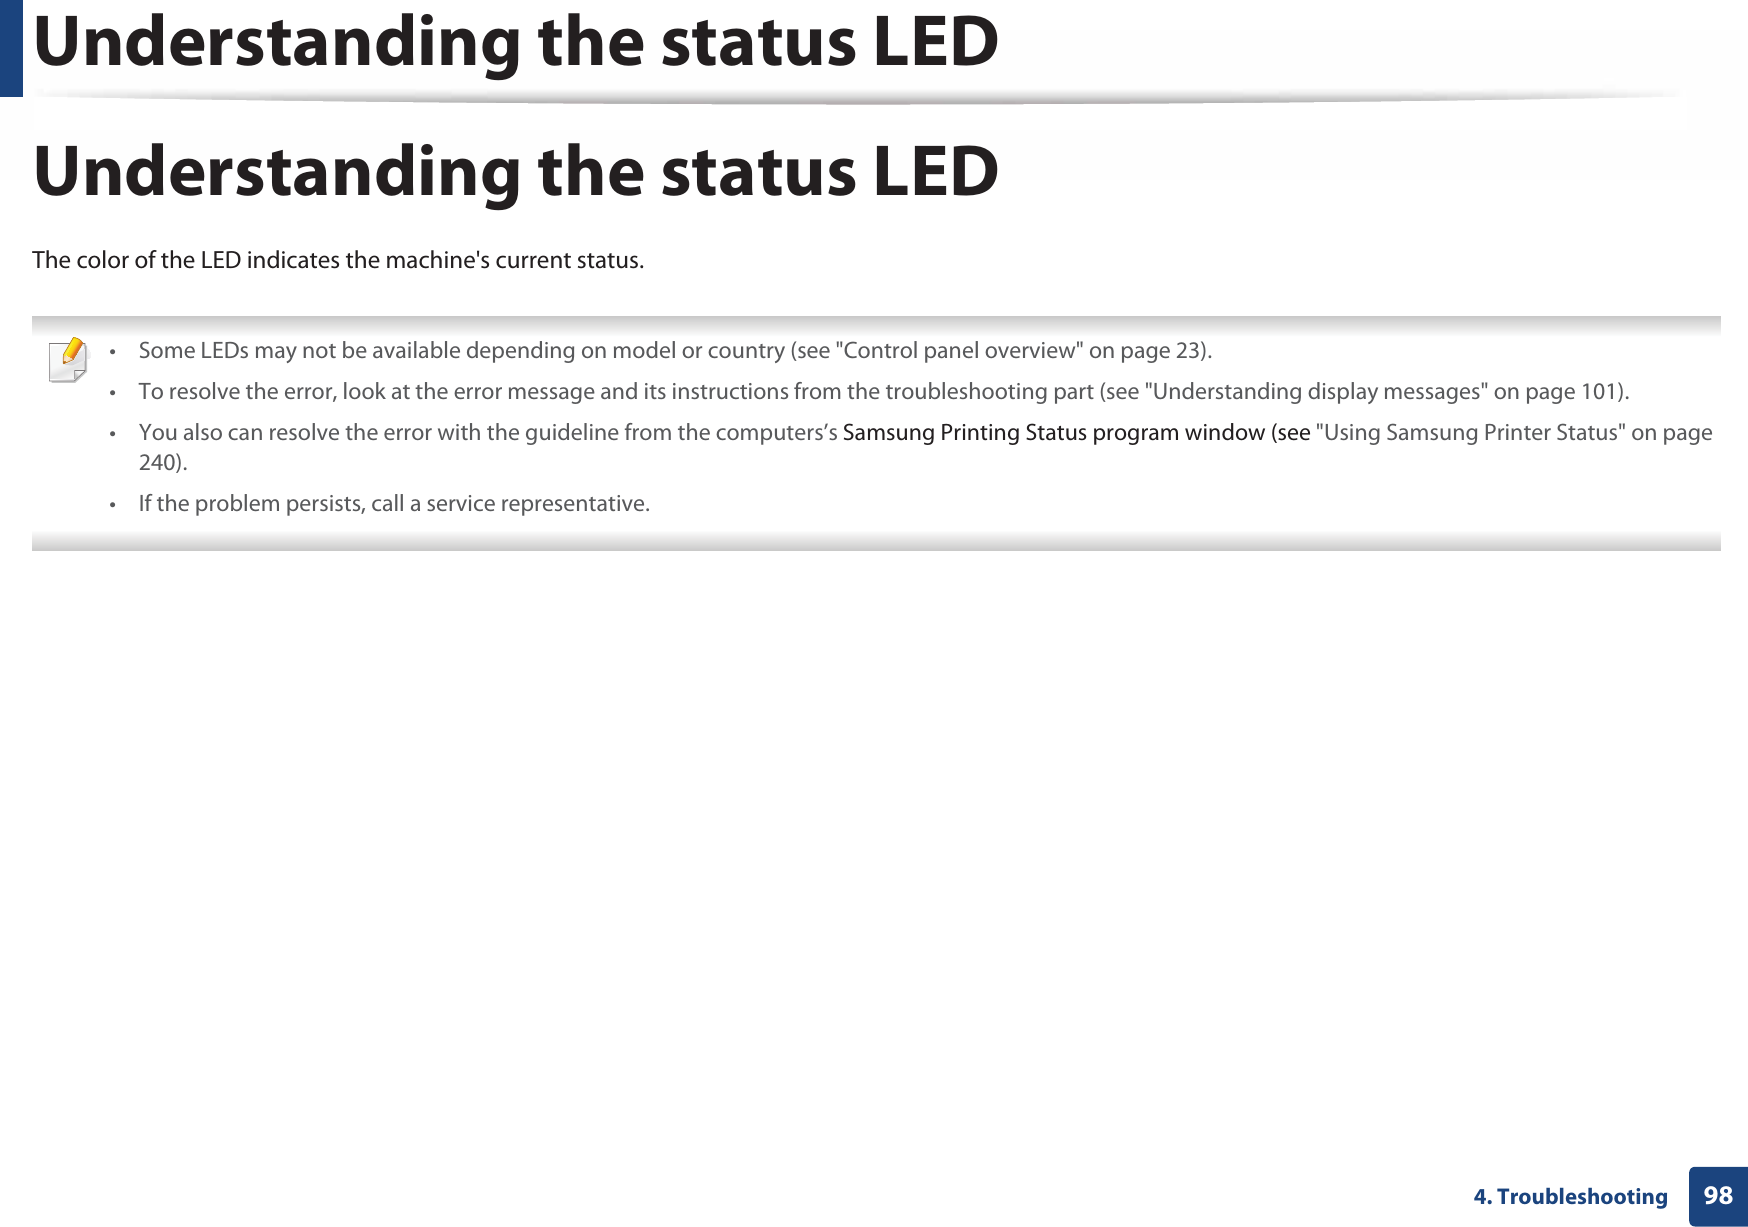 Understanding the status LED984. TroubleshootingUnderstanding the status LEDThe color of the LED indicates the machine&apos;s current status. • Some LEDs may not be available depending on model or country (see &quot;Control panel overview&quot; on page 23).• To resolve the error, look at the error message and its instructions from the troubleshooting part (see &quot;Understanding display messages&quot; on page 101).• You also can resolve the error with the guideline from the computers’s Samsung Printing Status program window (see &quot;Using Samsung Printer Status&quot; on page 240).• If the problem persists, call a service representative. 